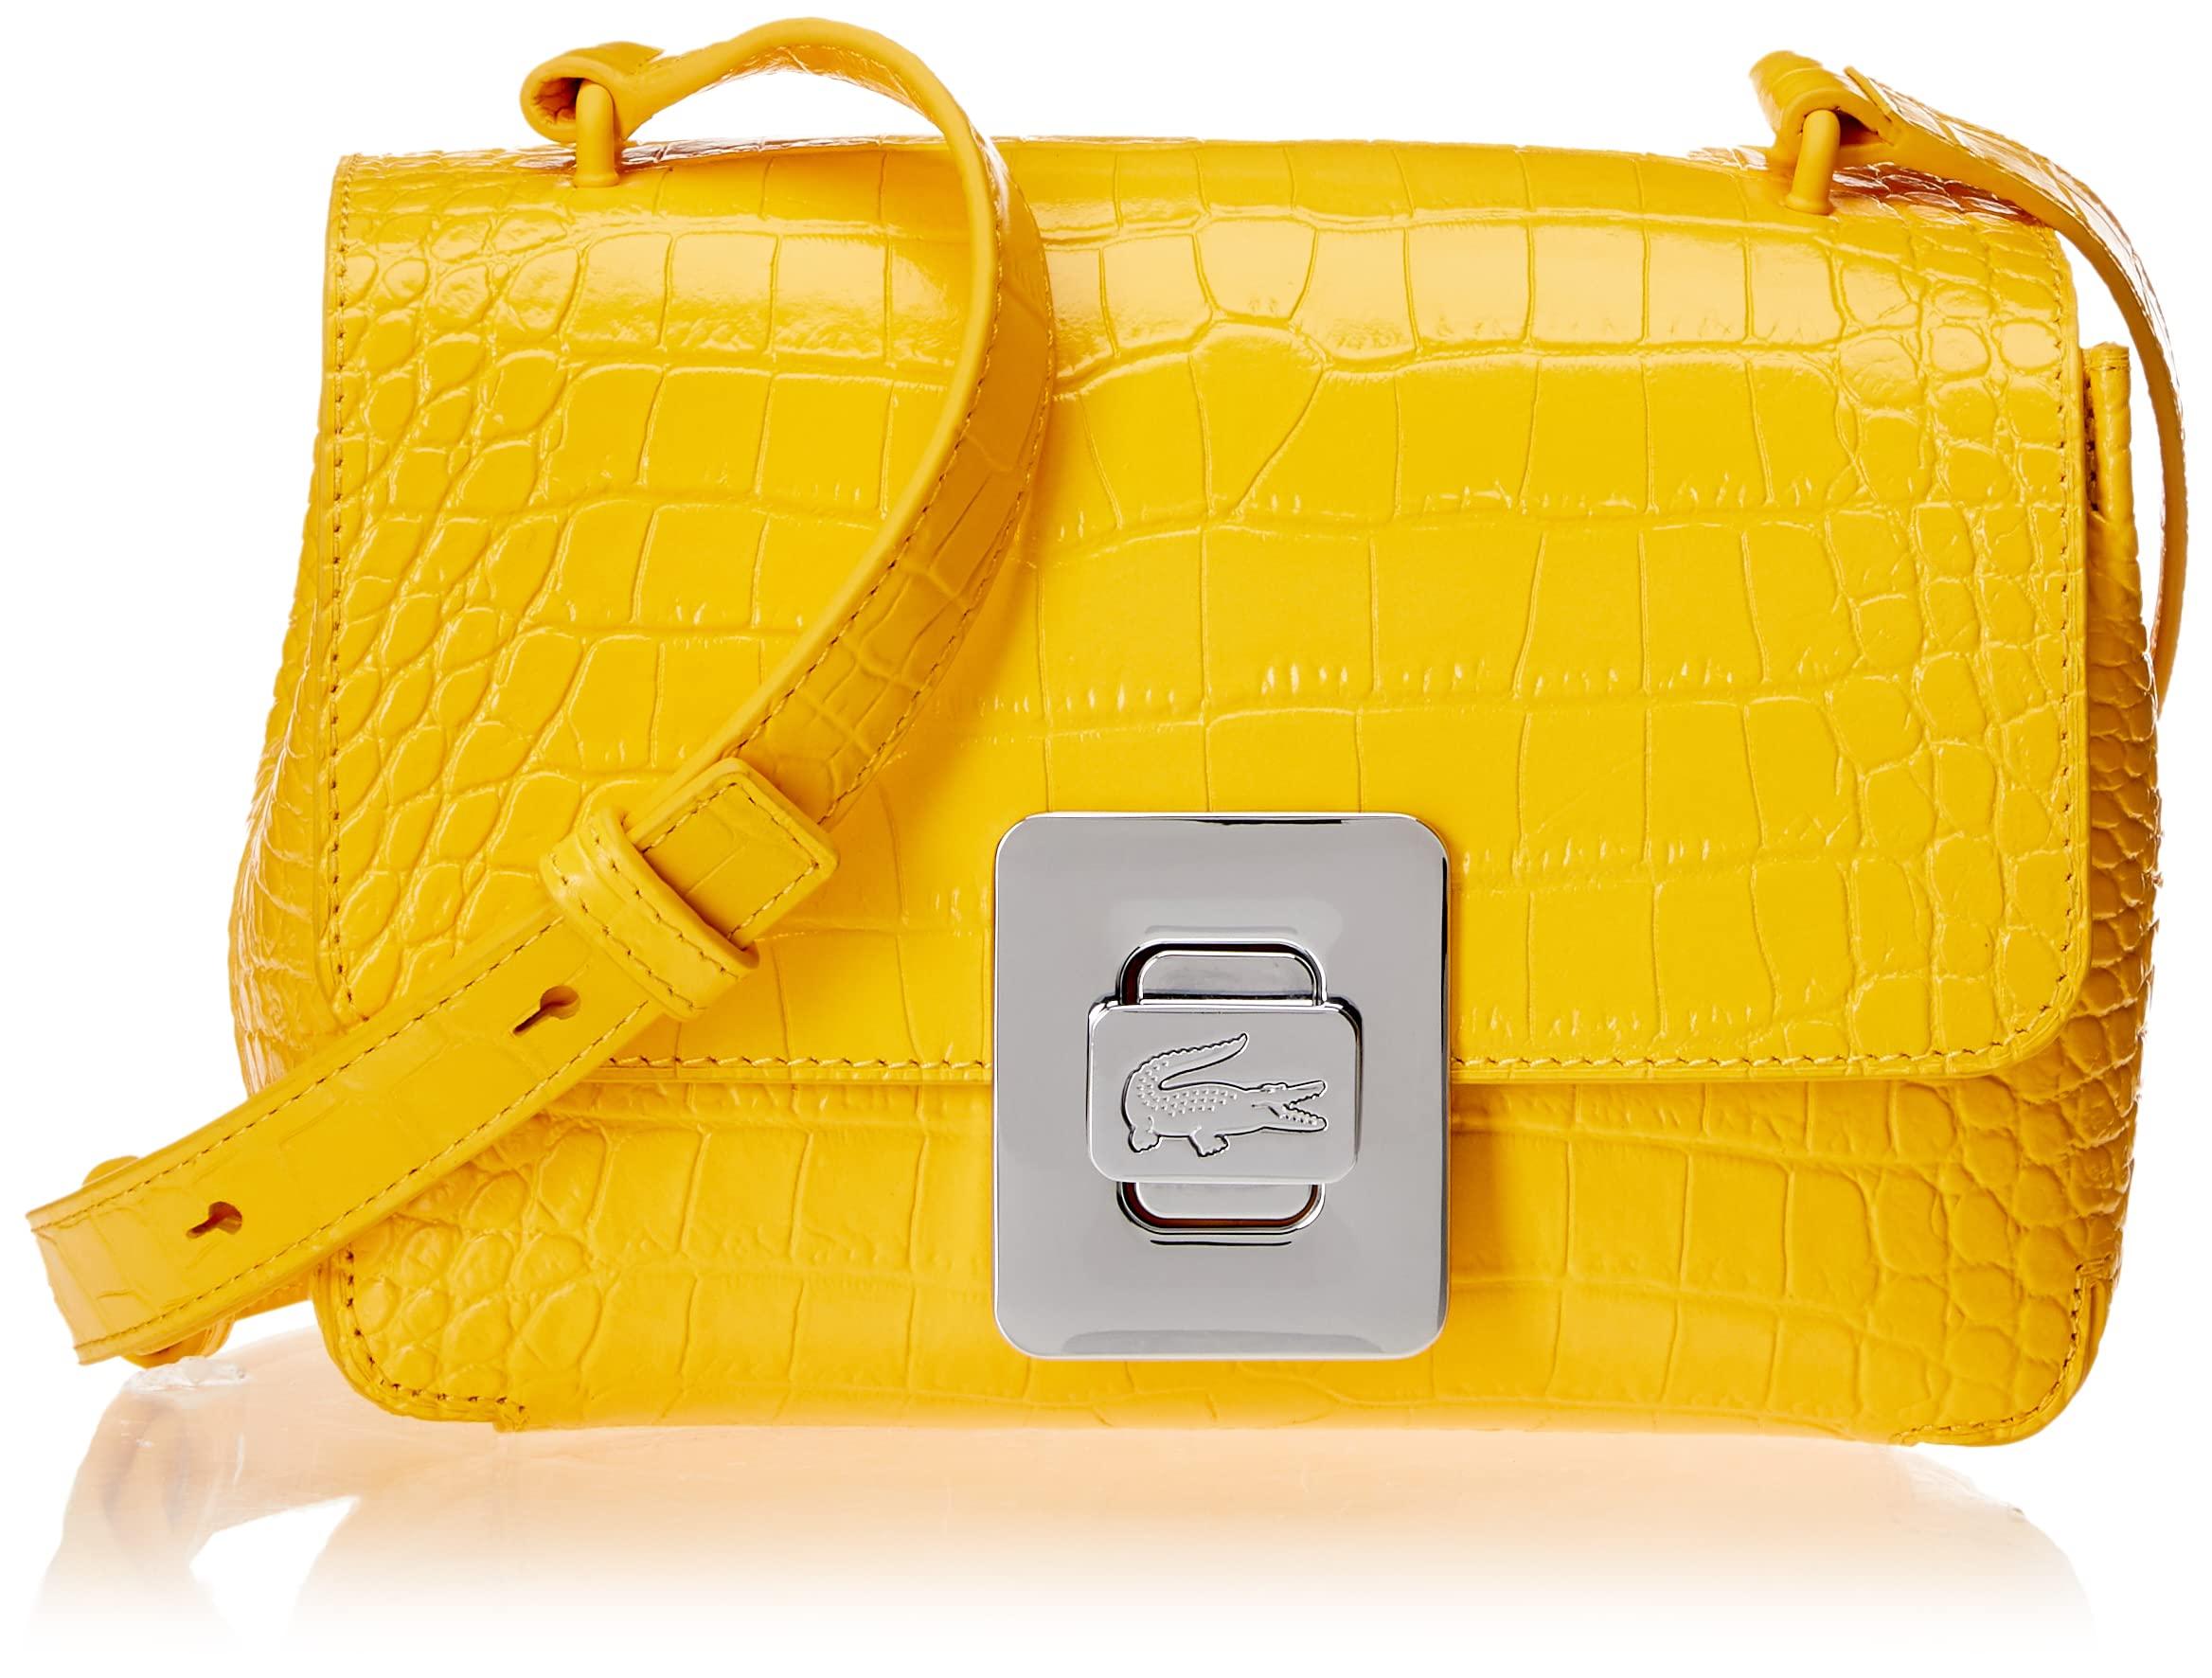 Lacoste Amelia Shoulder Bag in Yellow | Lyst